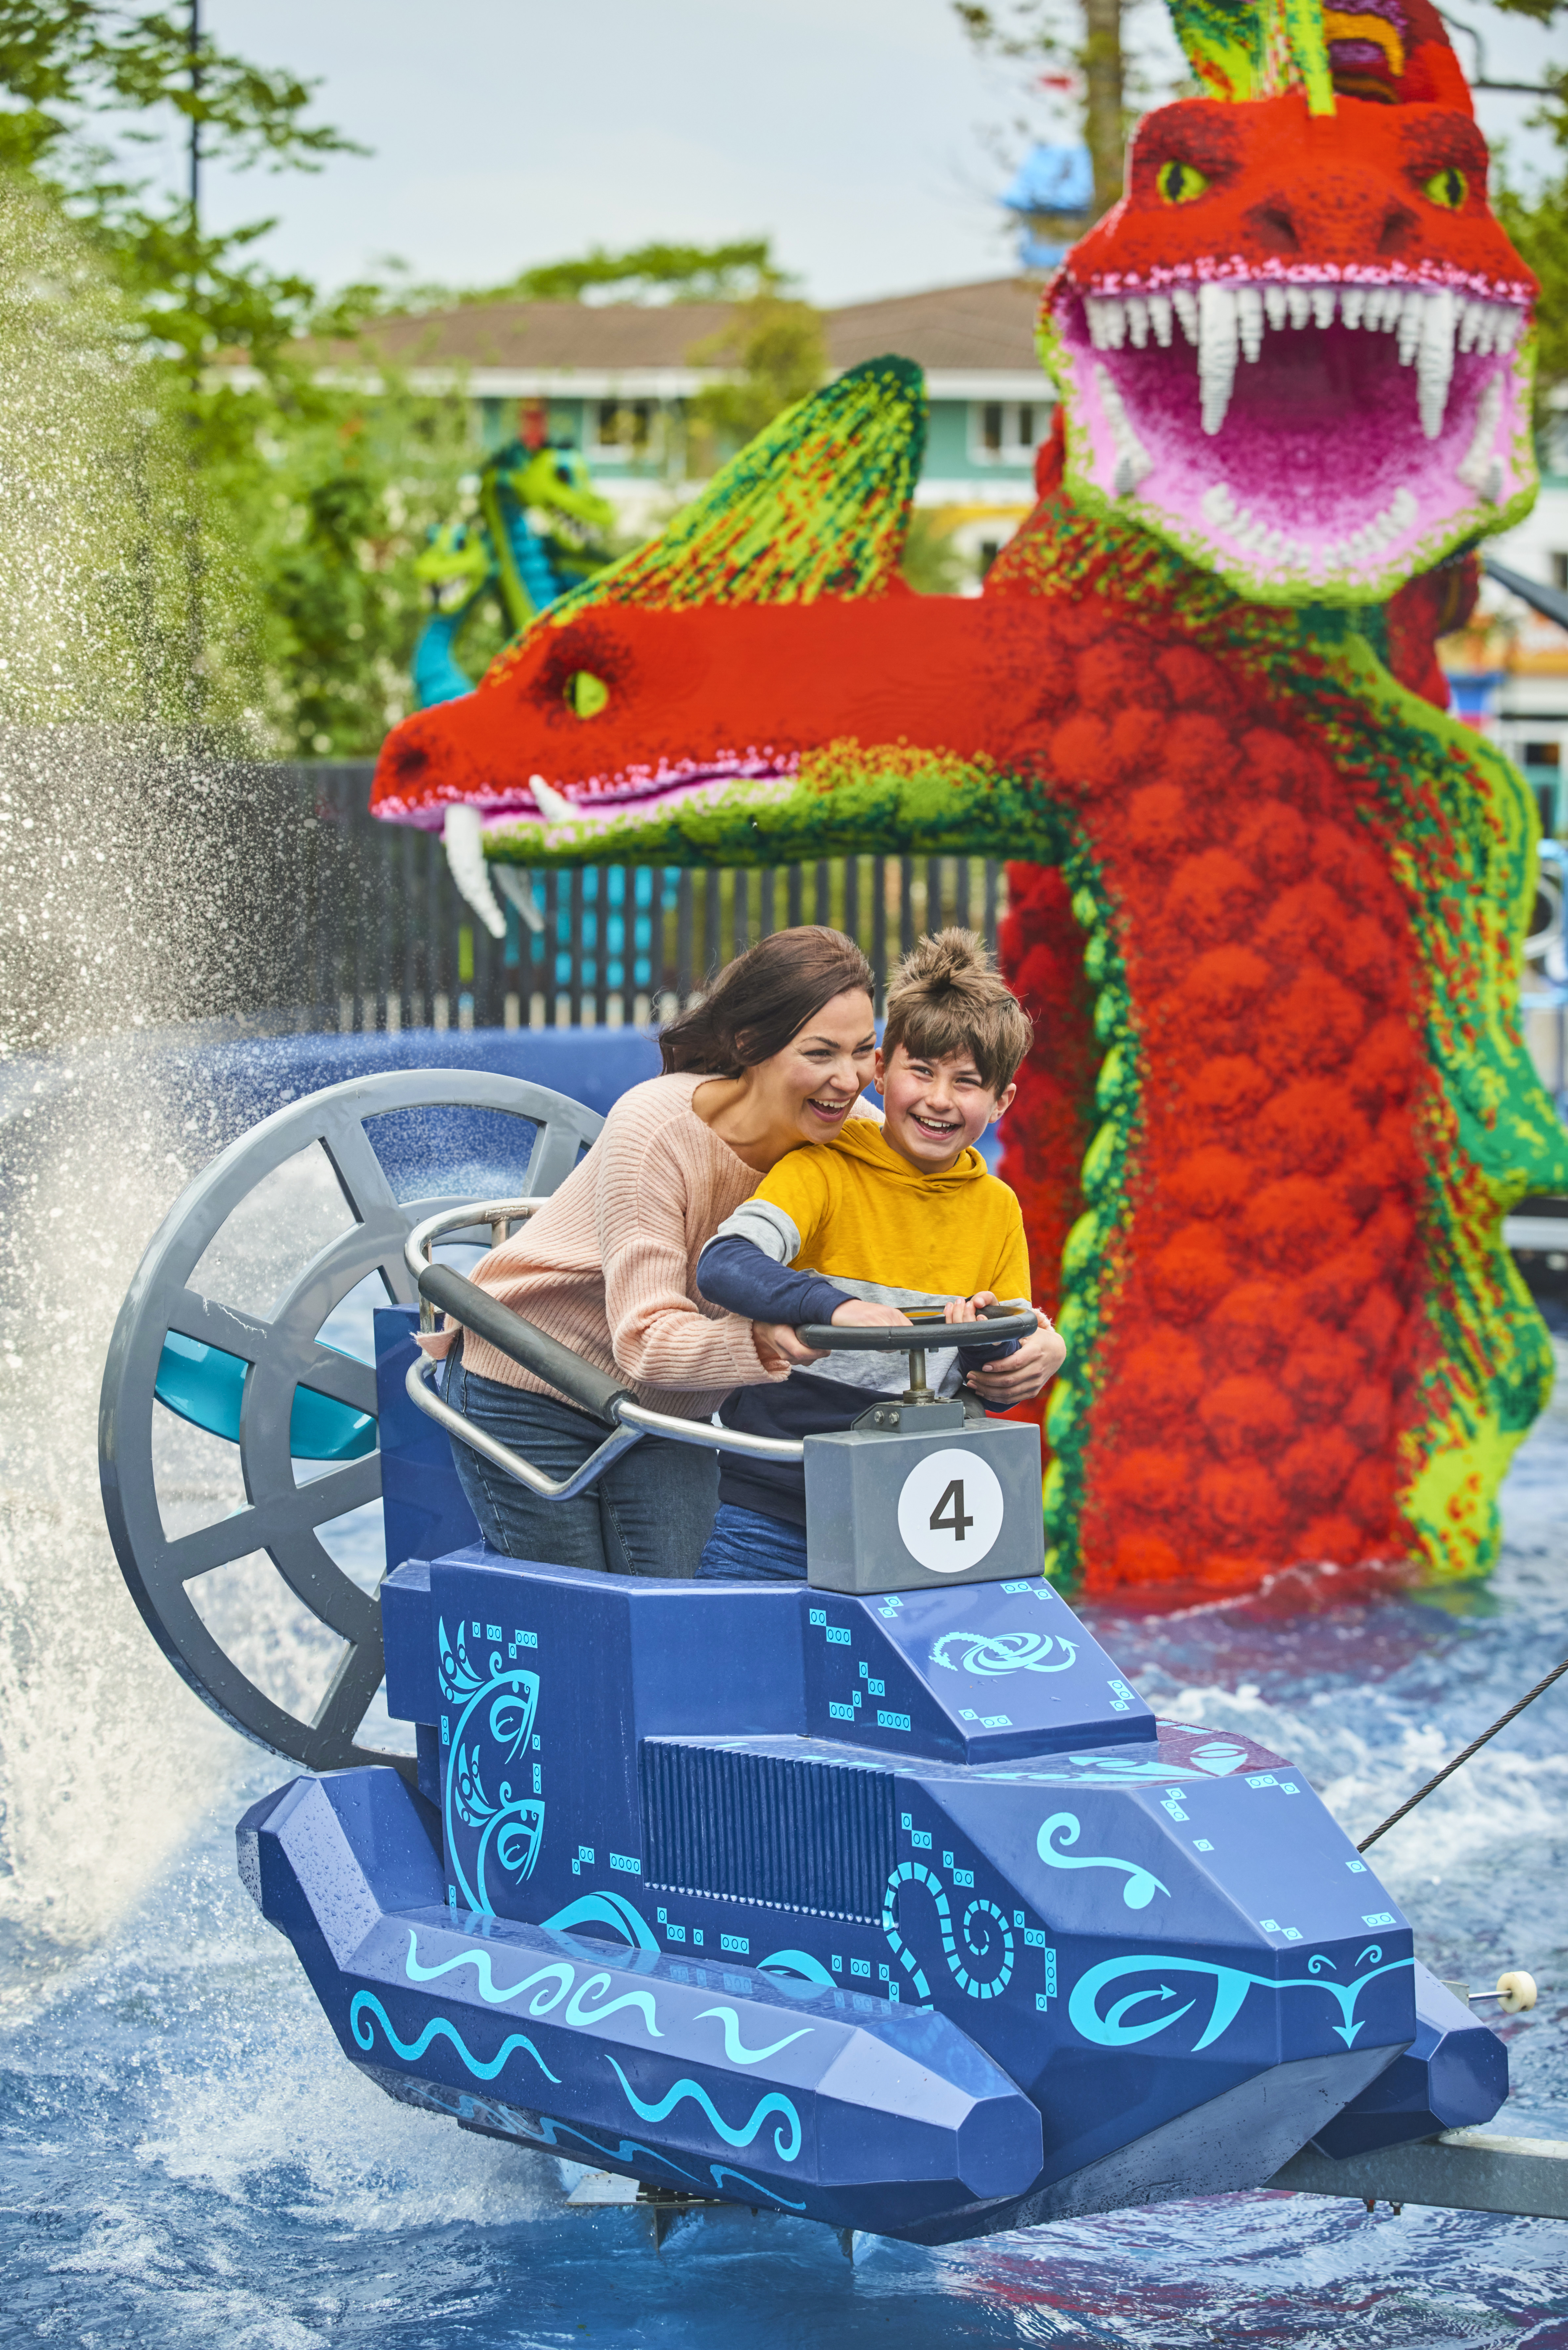 Adult & child getting splashed on Hydra's Challenge in LEGO MYTHICA